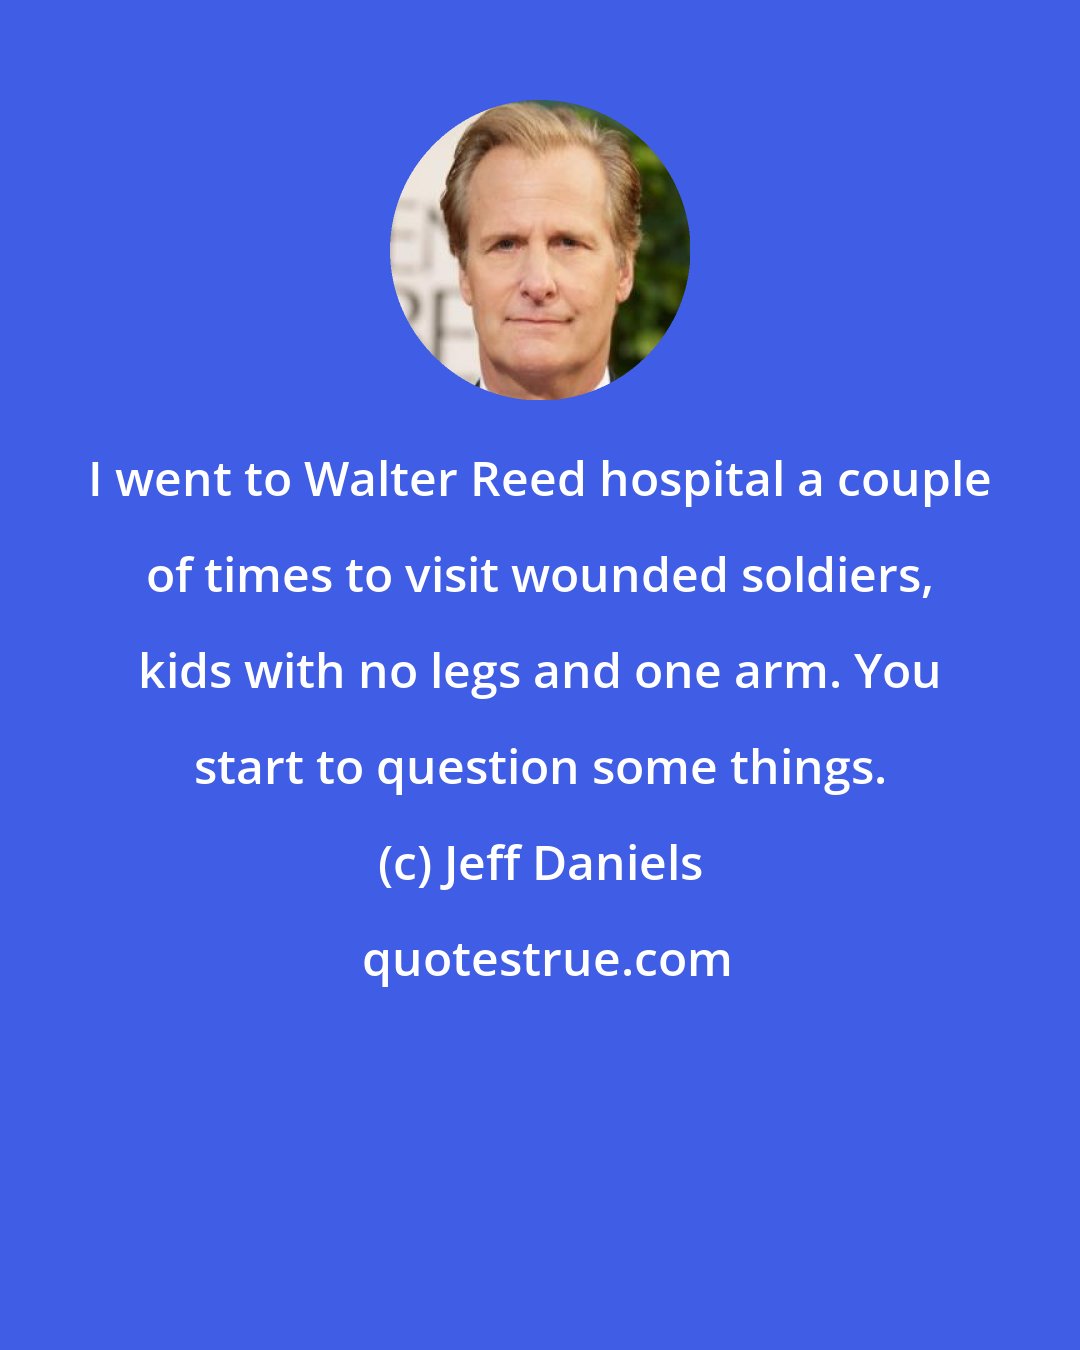 Jeff Daniels: I went to Walter Reed hospital a couple of times to visit wounded soldiers, kids with no legs and one arm. You start to question some things.